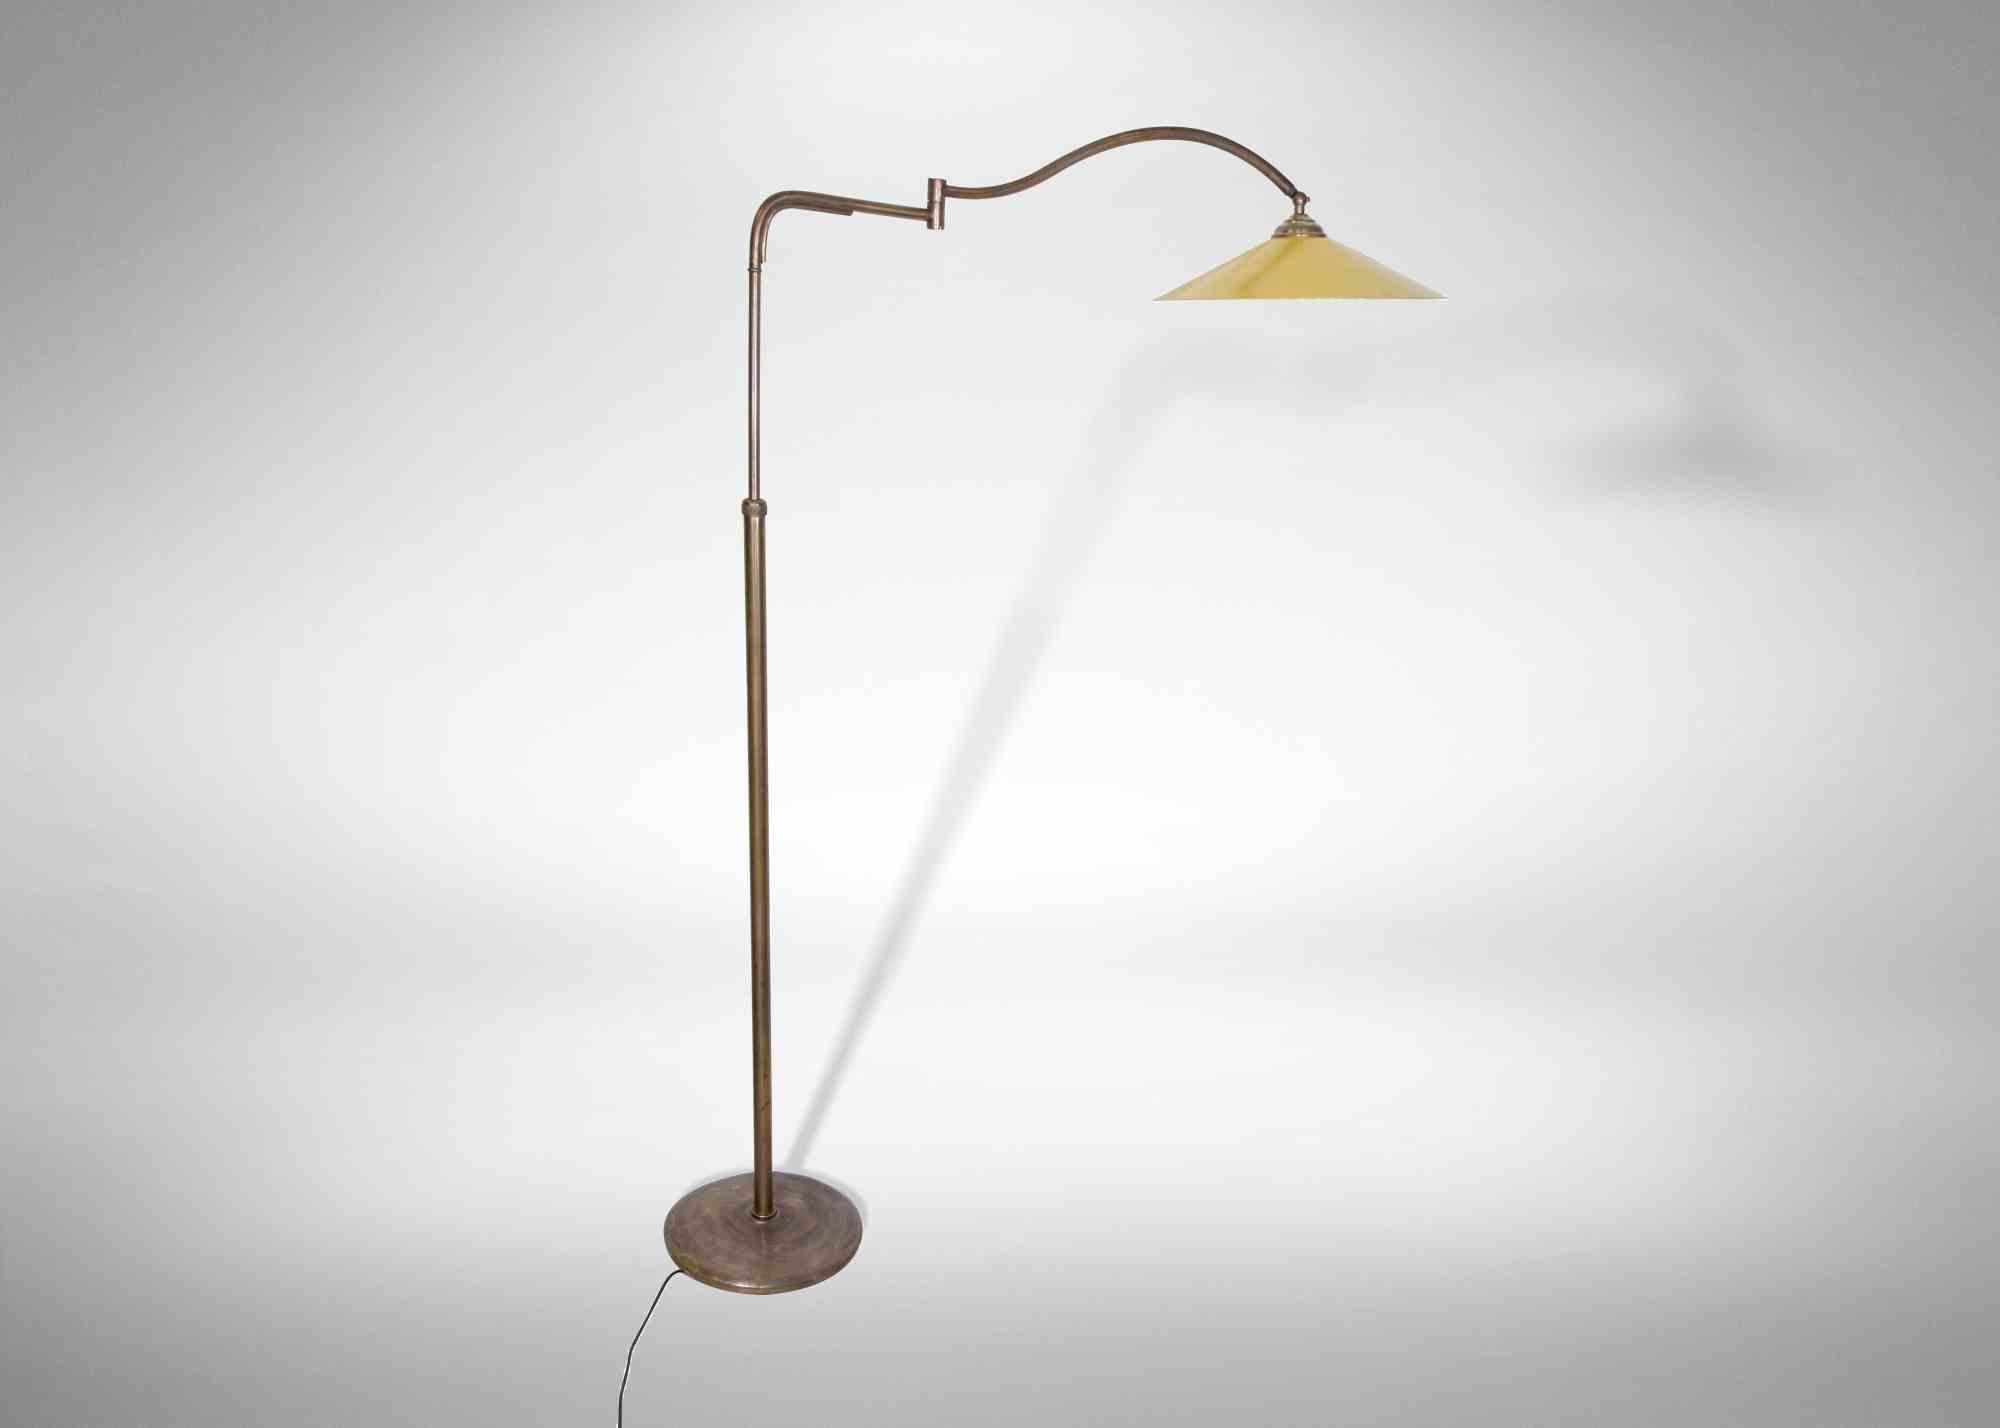 Vintage foor lamp by Arredoluce is an original lamp attributed to Angelo Lelli and manufactured by Arredoluce in 1950s.

A brass and metal lamp yellow colored.

Good conditions.

Arredoluce was a lighting manufacturer founded by Angelo Lelli